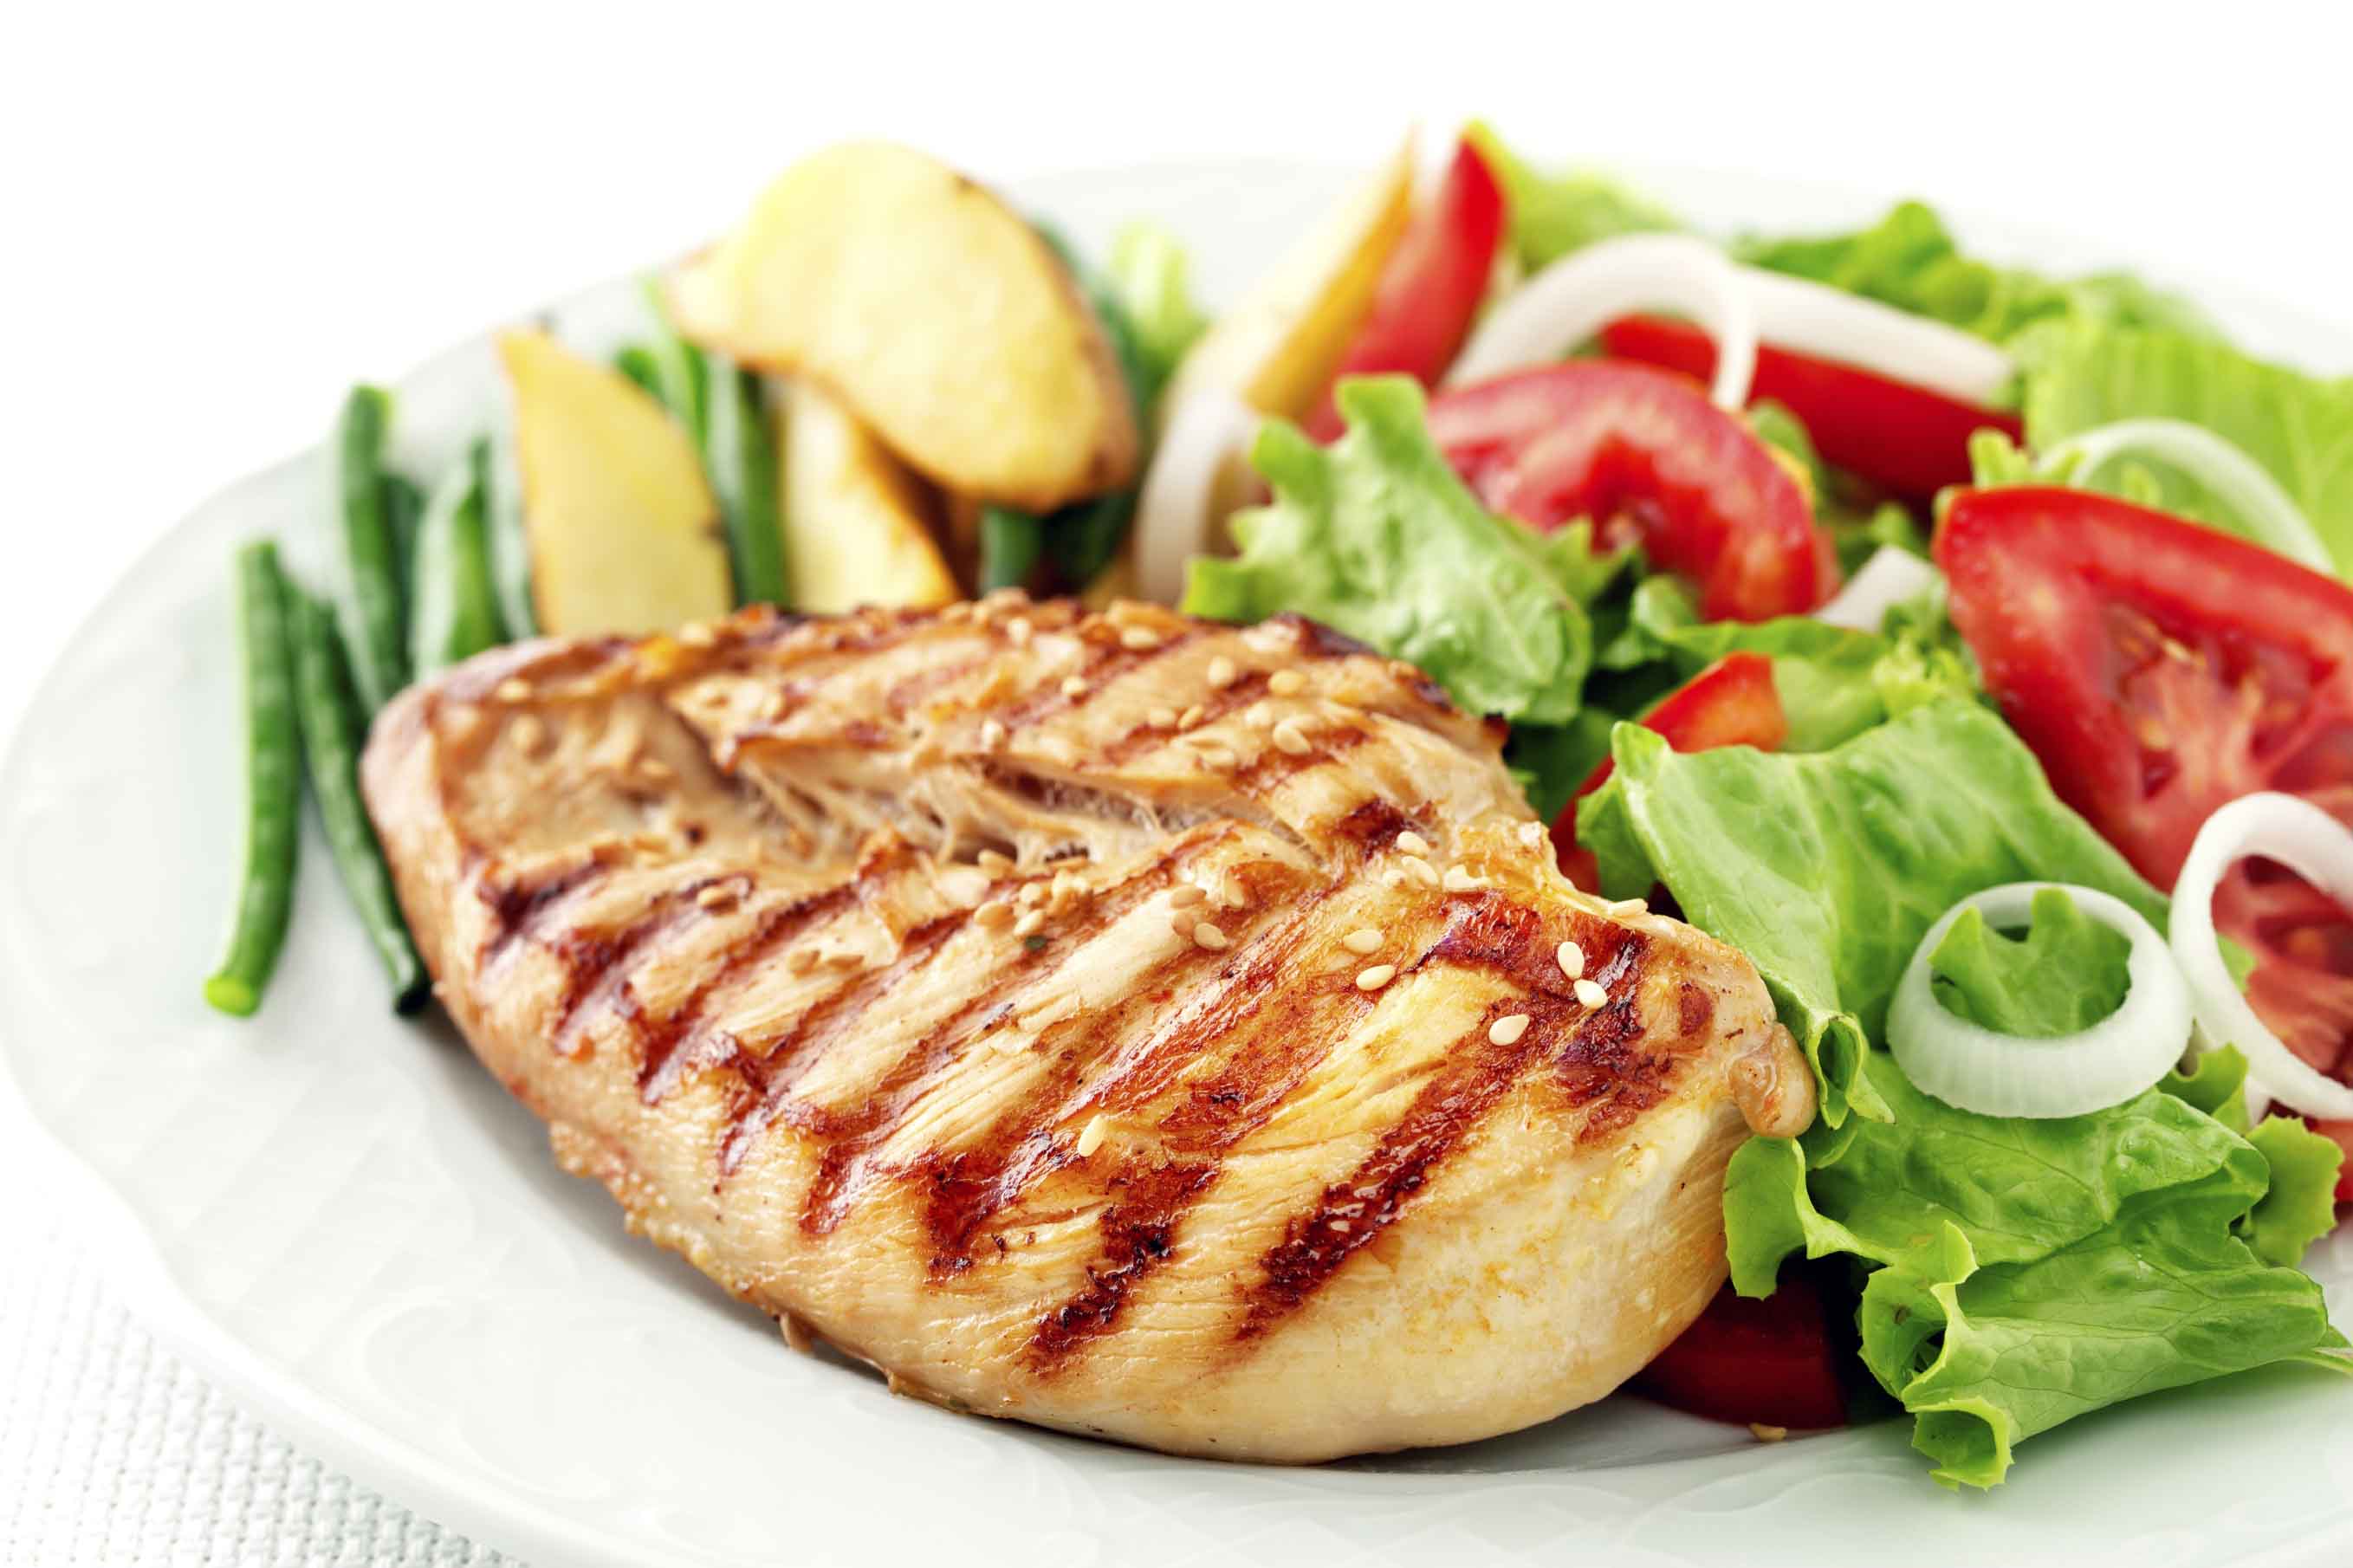 Grilled chicken fillet with salad